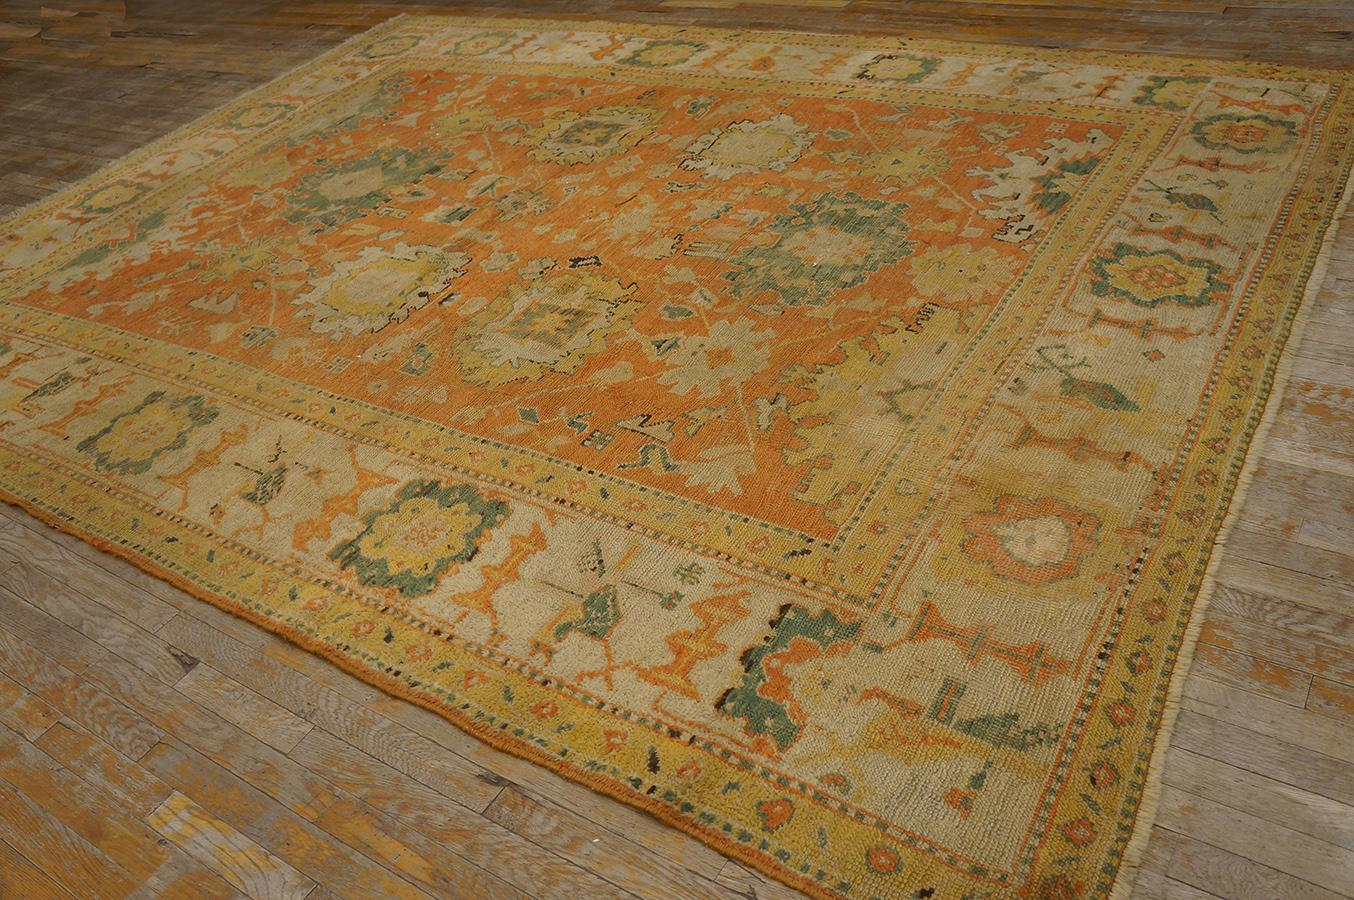 Late 19th Century Turkish Anatolian Oushak Carpet (8'4''x 11'2'' - 254 x 340 cm) In Good Condition For Sale In New York, NY